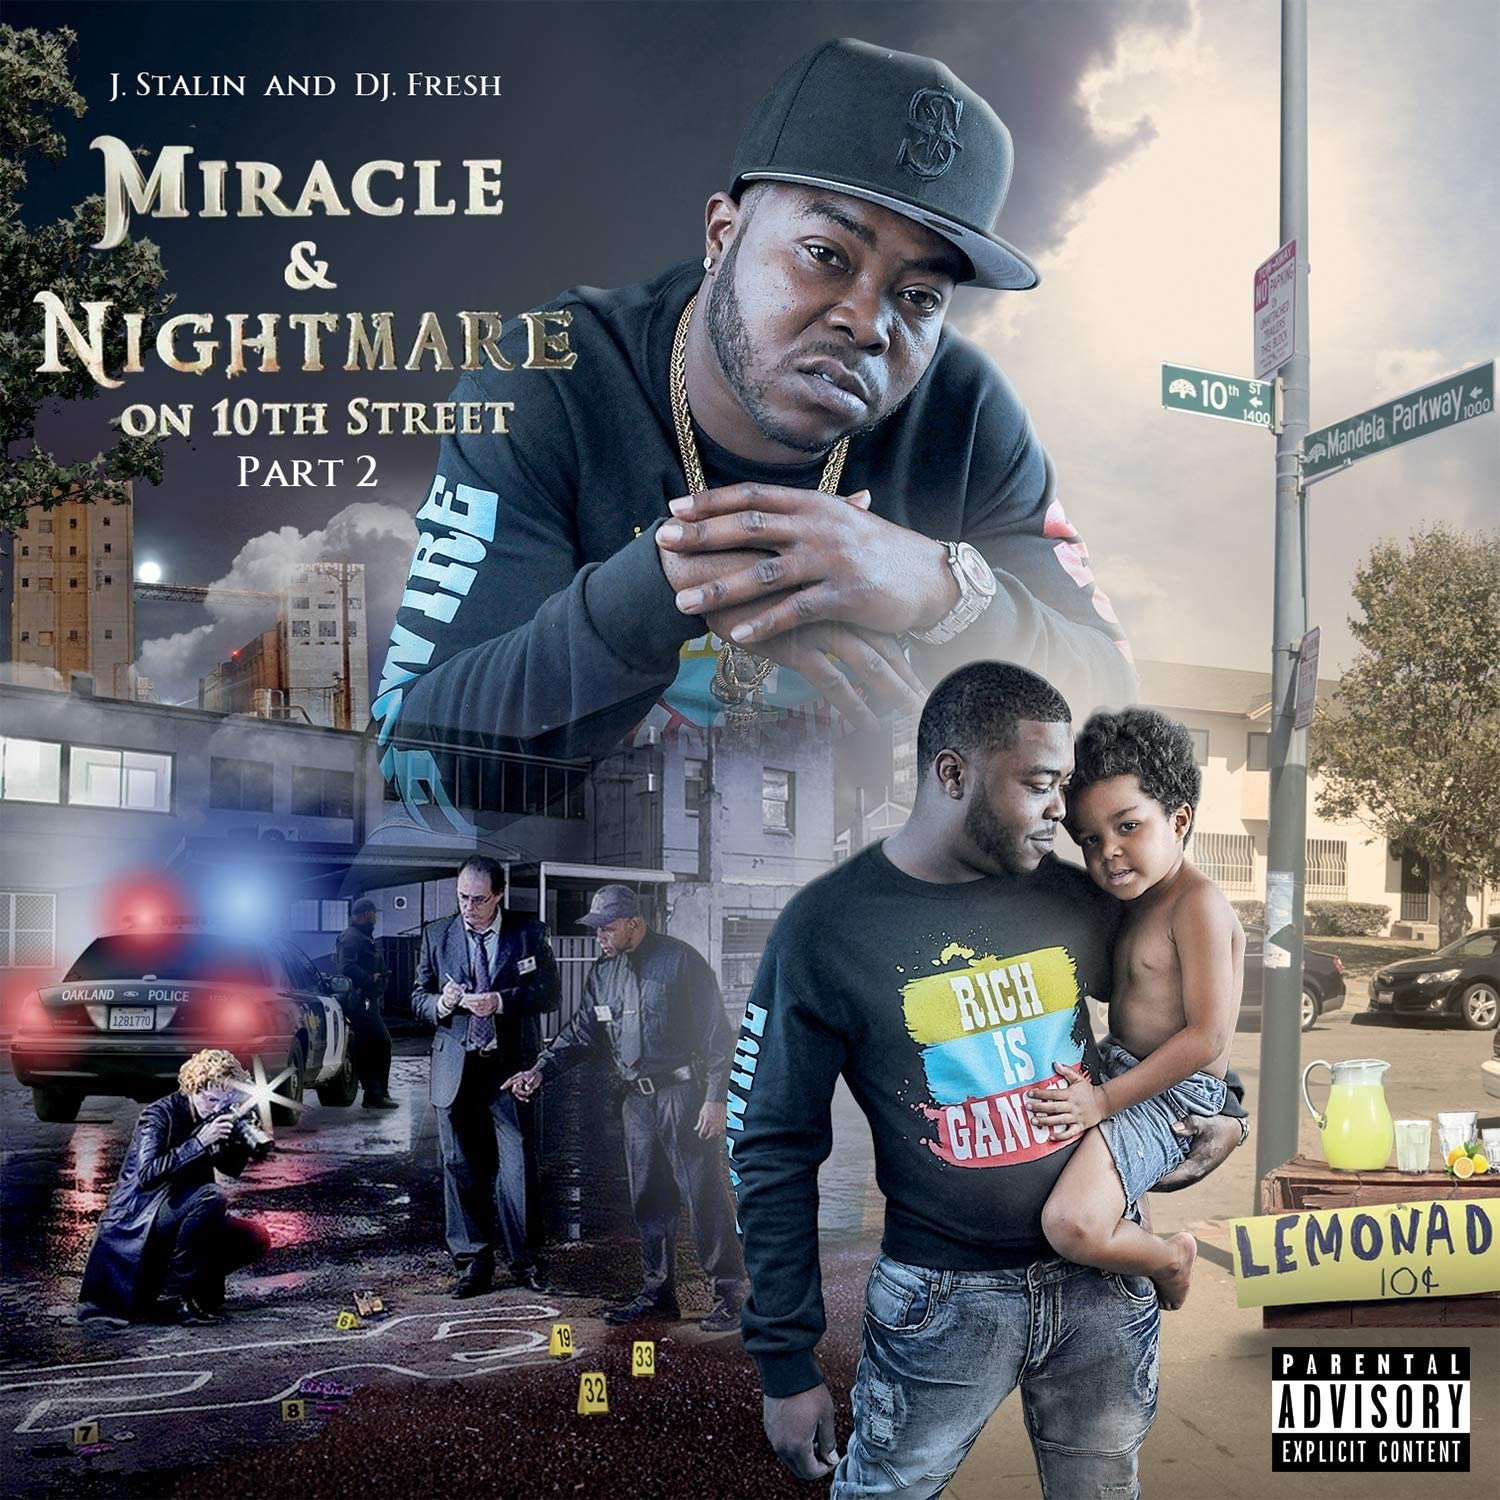 CD Shop - STALIN, J. AND DJ FRESH MIRACLE & NIGHTMARE ON 10TH ST PT.2